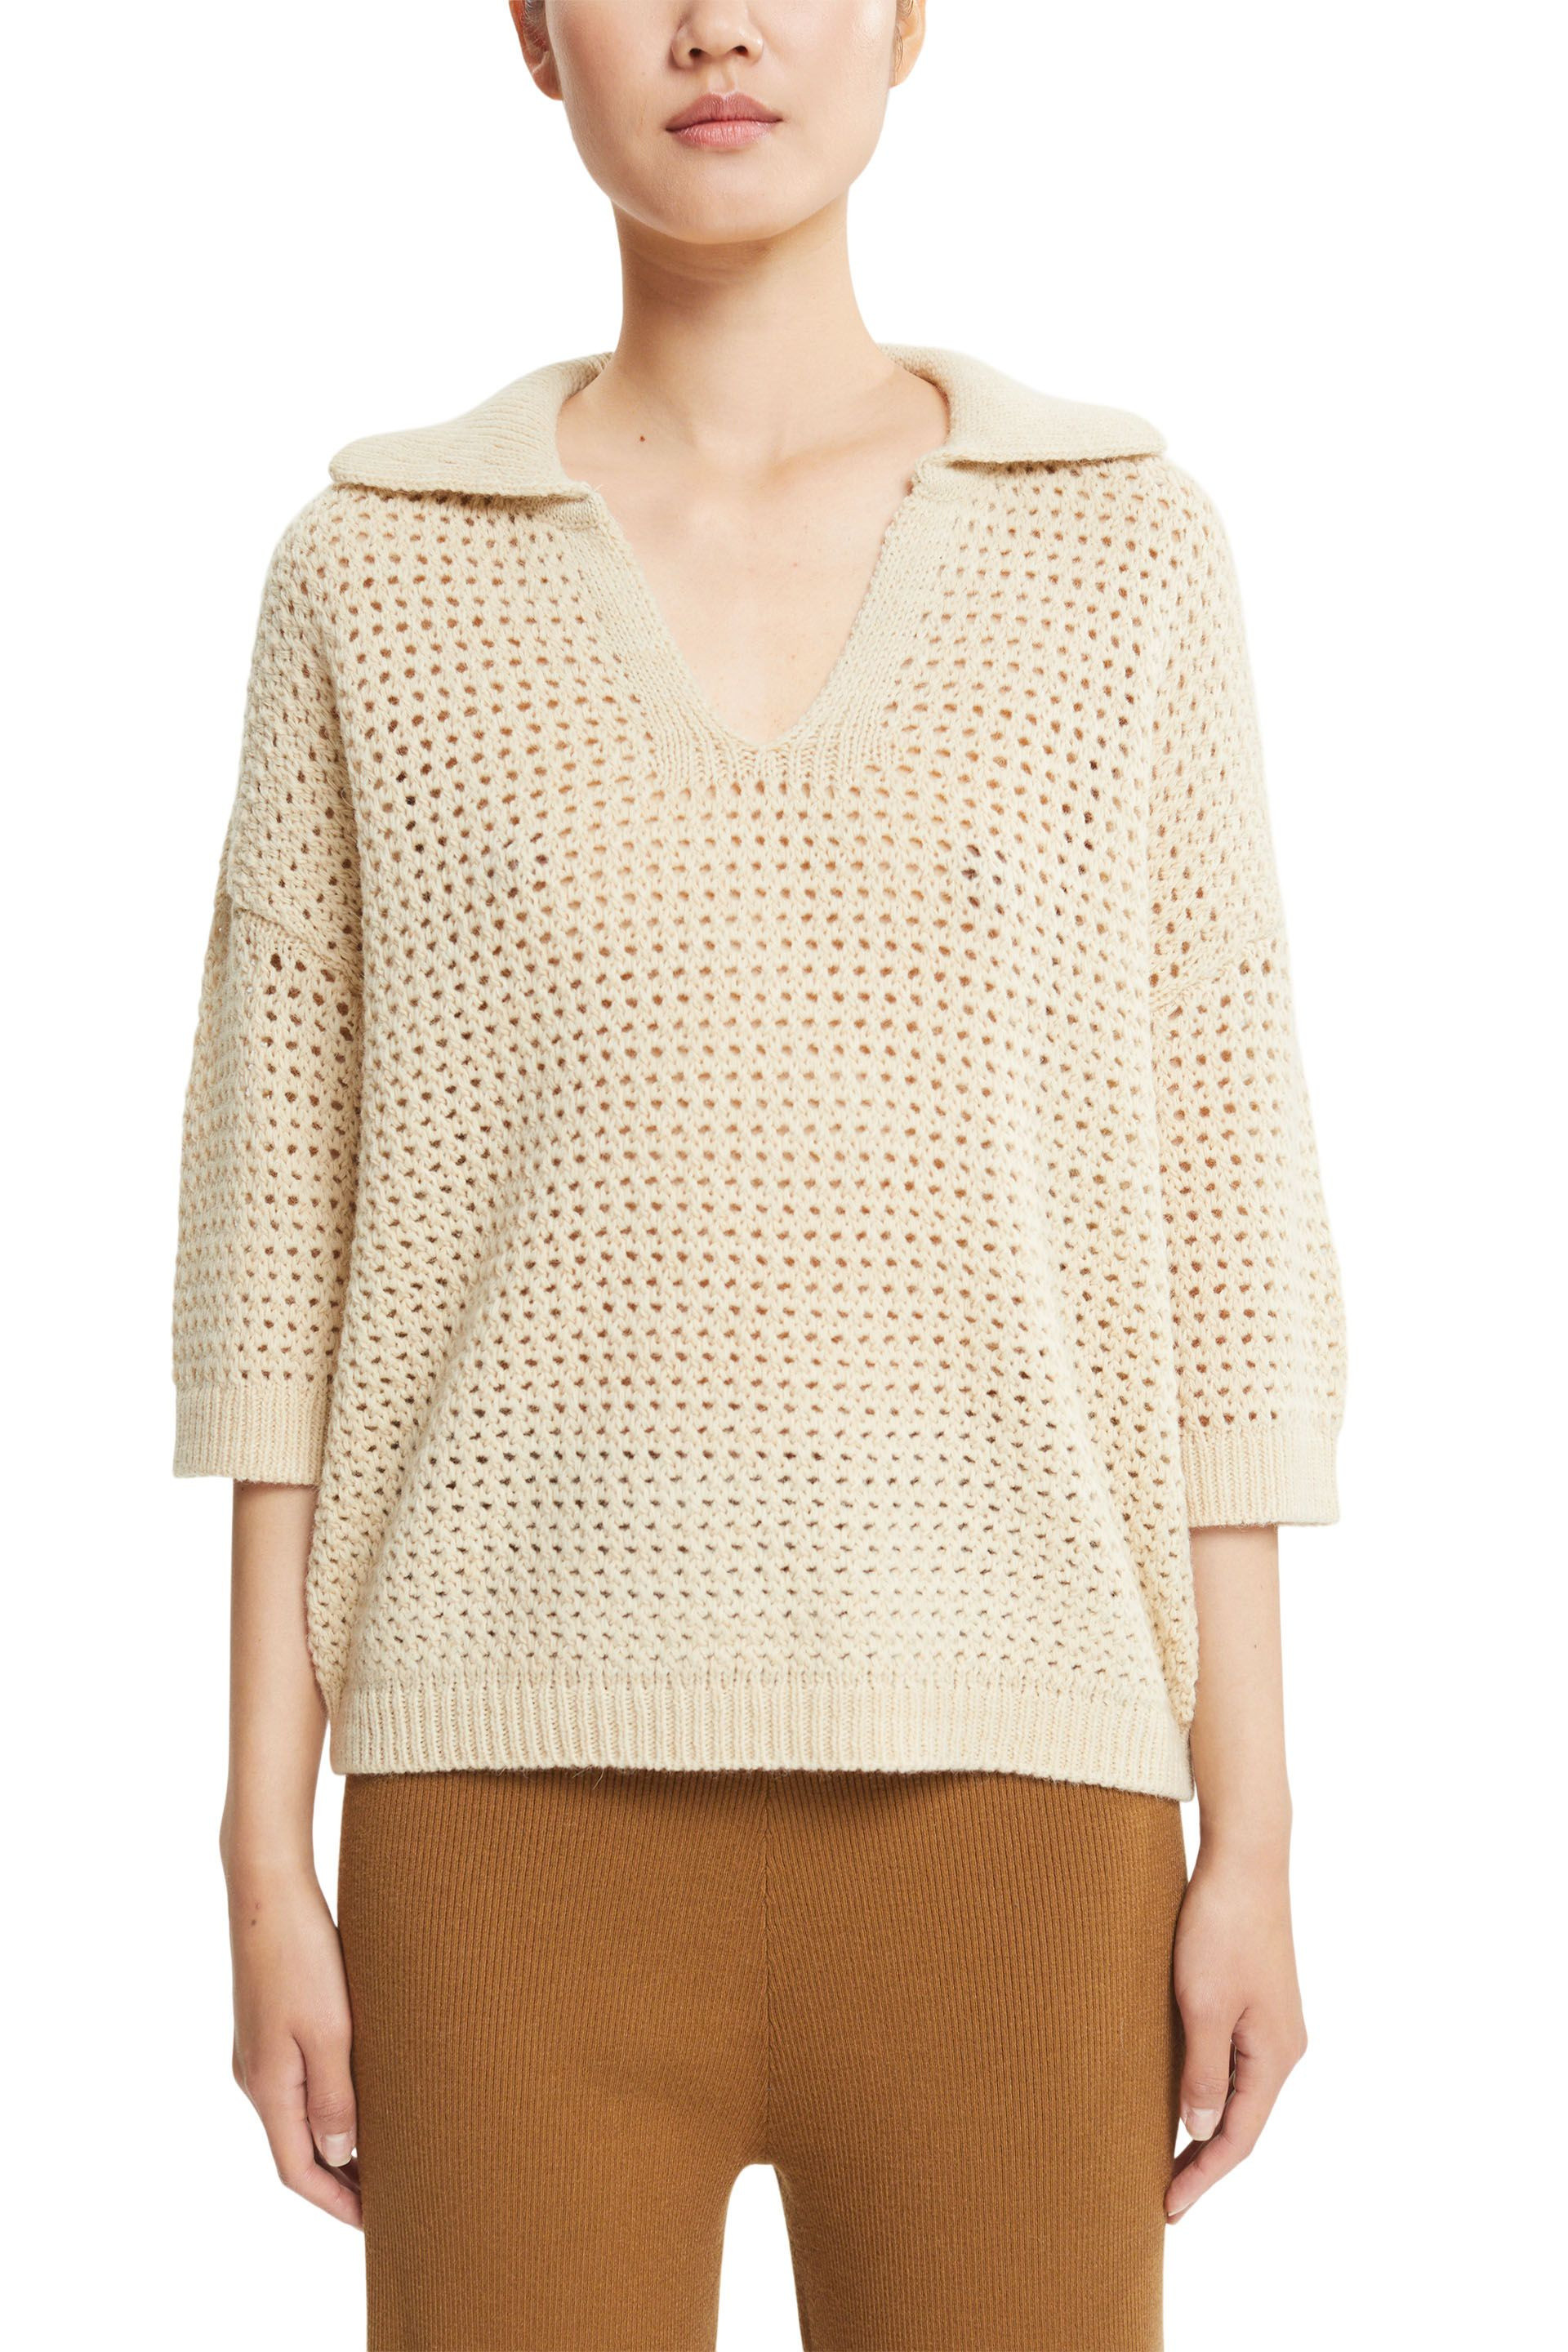 Pullover in structured mesh, Beige, large image number 1